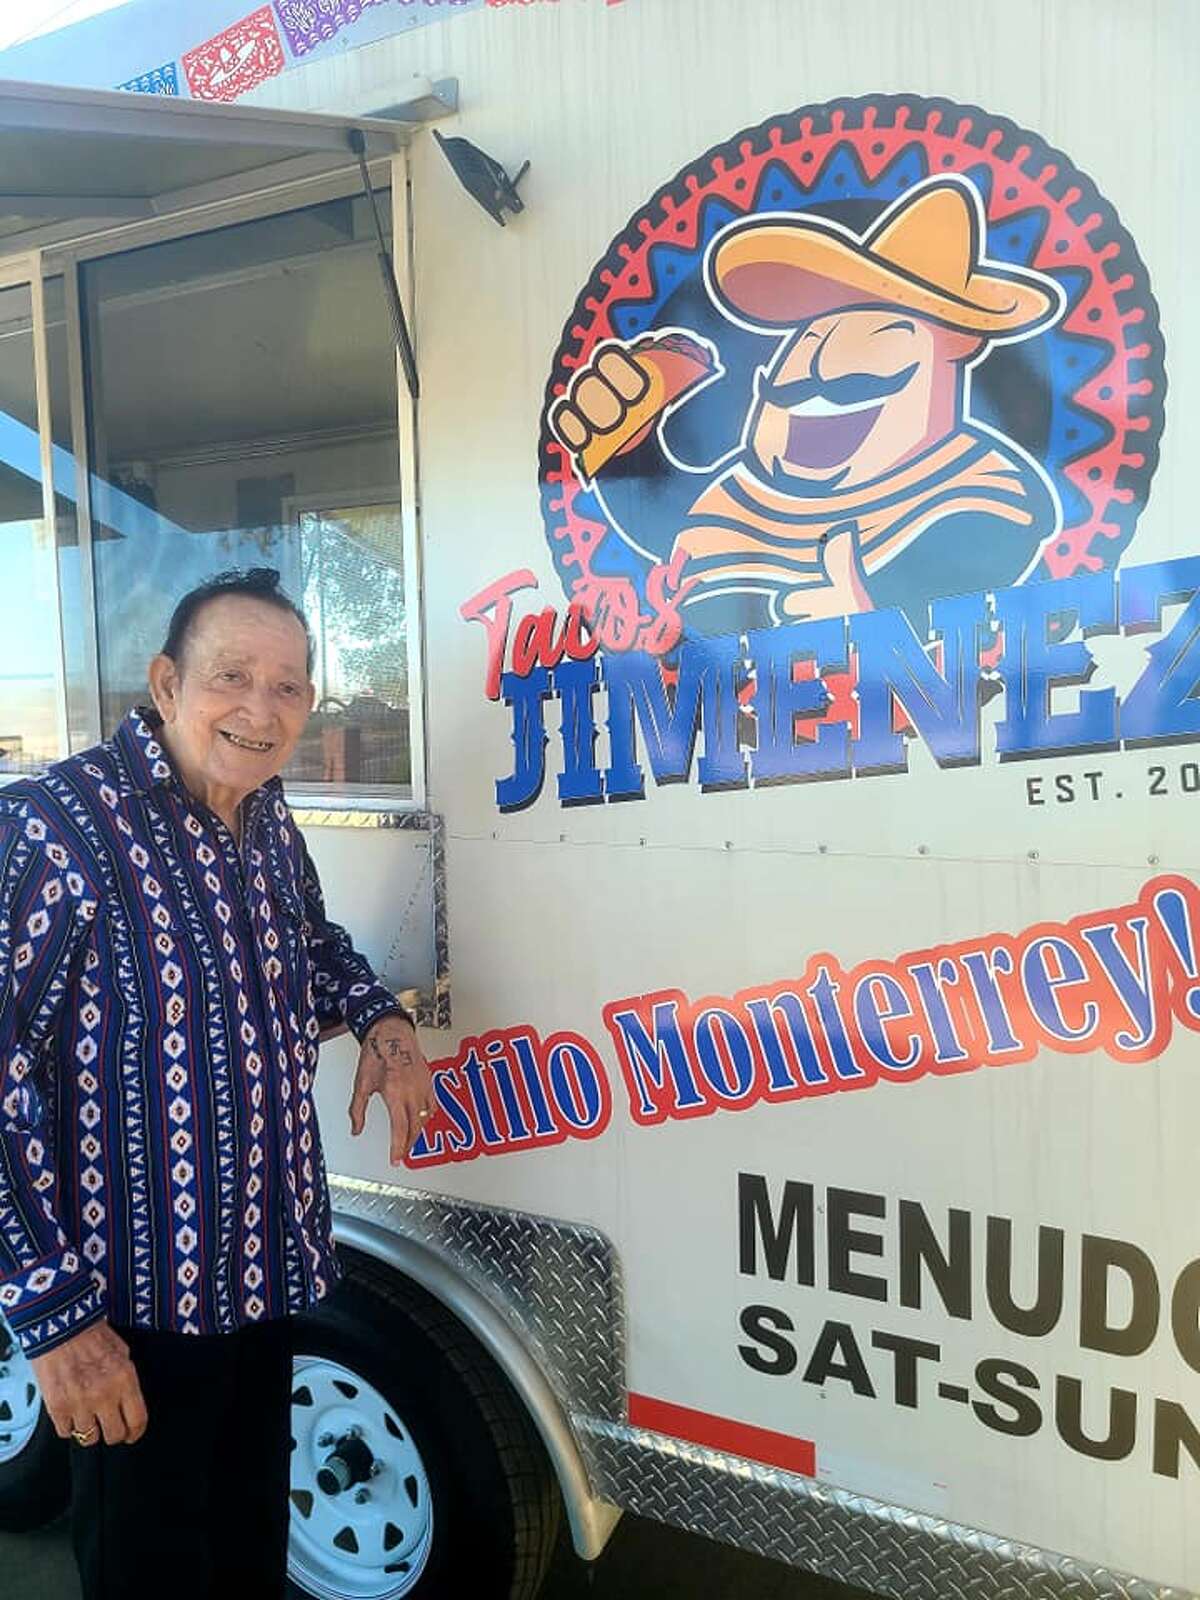 Tacos Jimenez, once owned by accordion ace Flaco Jimenez, is getting a second life thanks to his son and namesake, Leonardo Jimenez III. The younger Leonardo Jimenez said he and his wife Gilda Jimenez spent their savings to launch the mobile restaurant. Leonardo Jimenez said his parents owned a food truck about 20 years ago. His iteration Tacos Jimenez will start serving on Jan. 7.